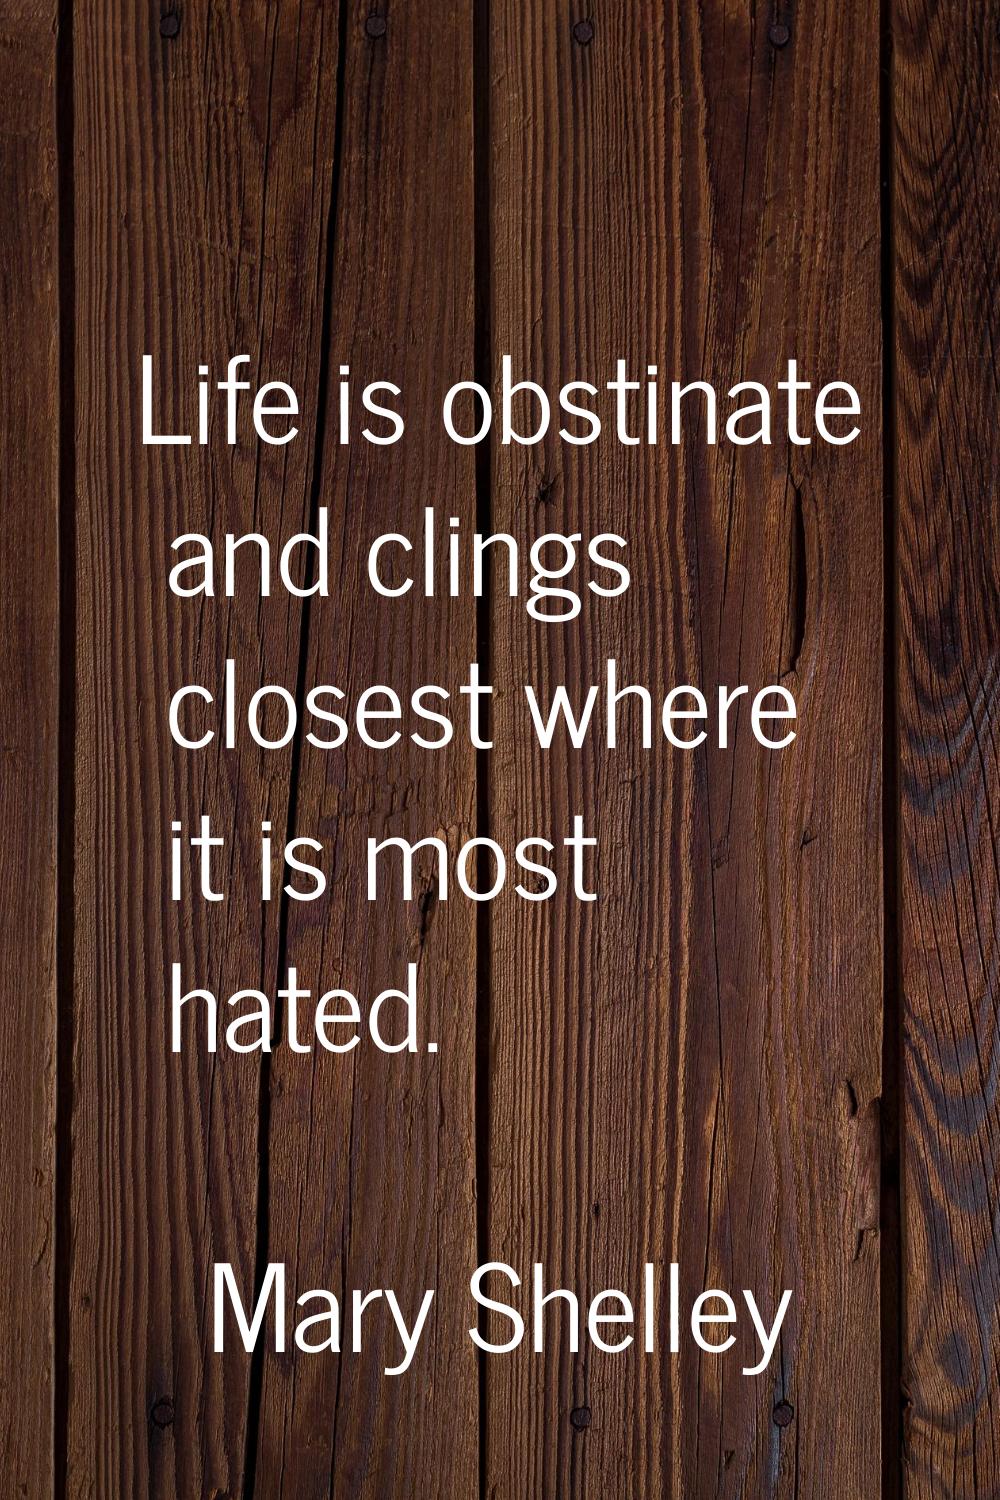 Life is obstinate and clings closest where it is most hated.